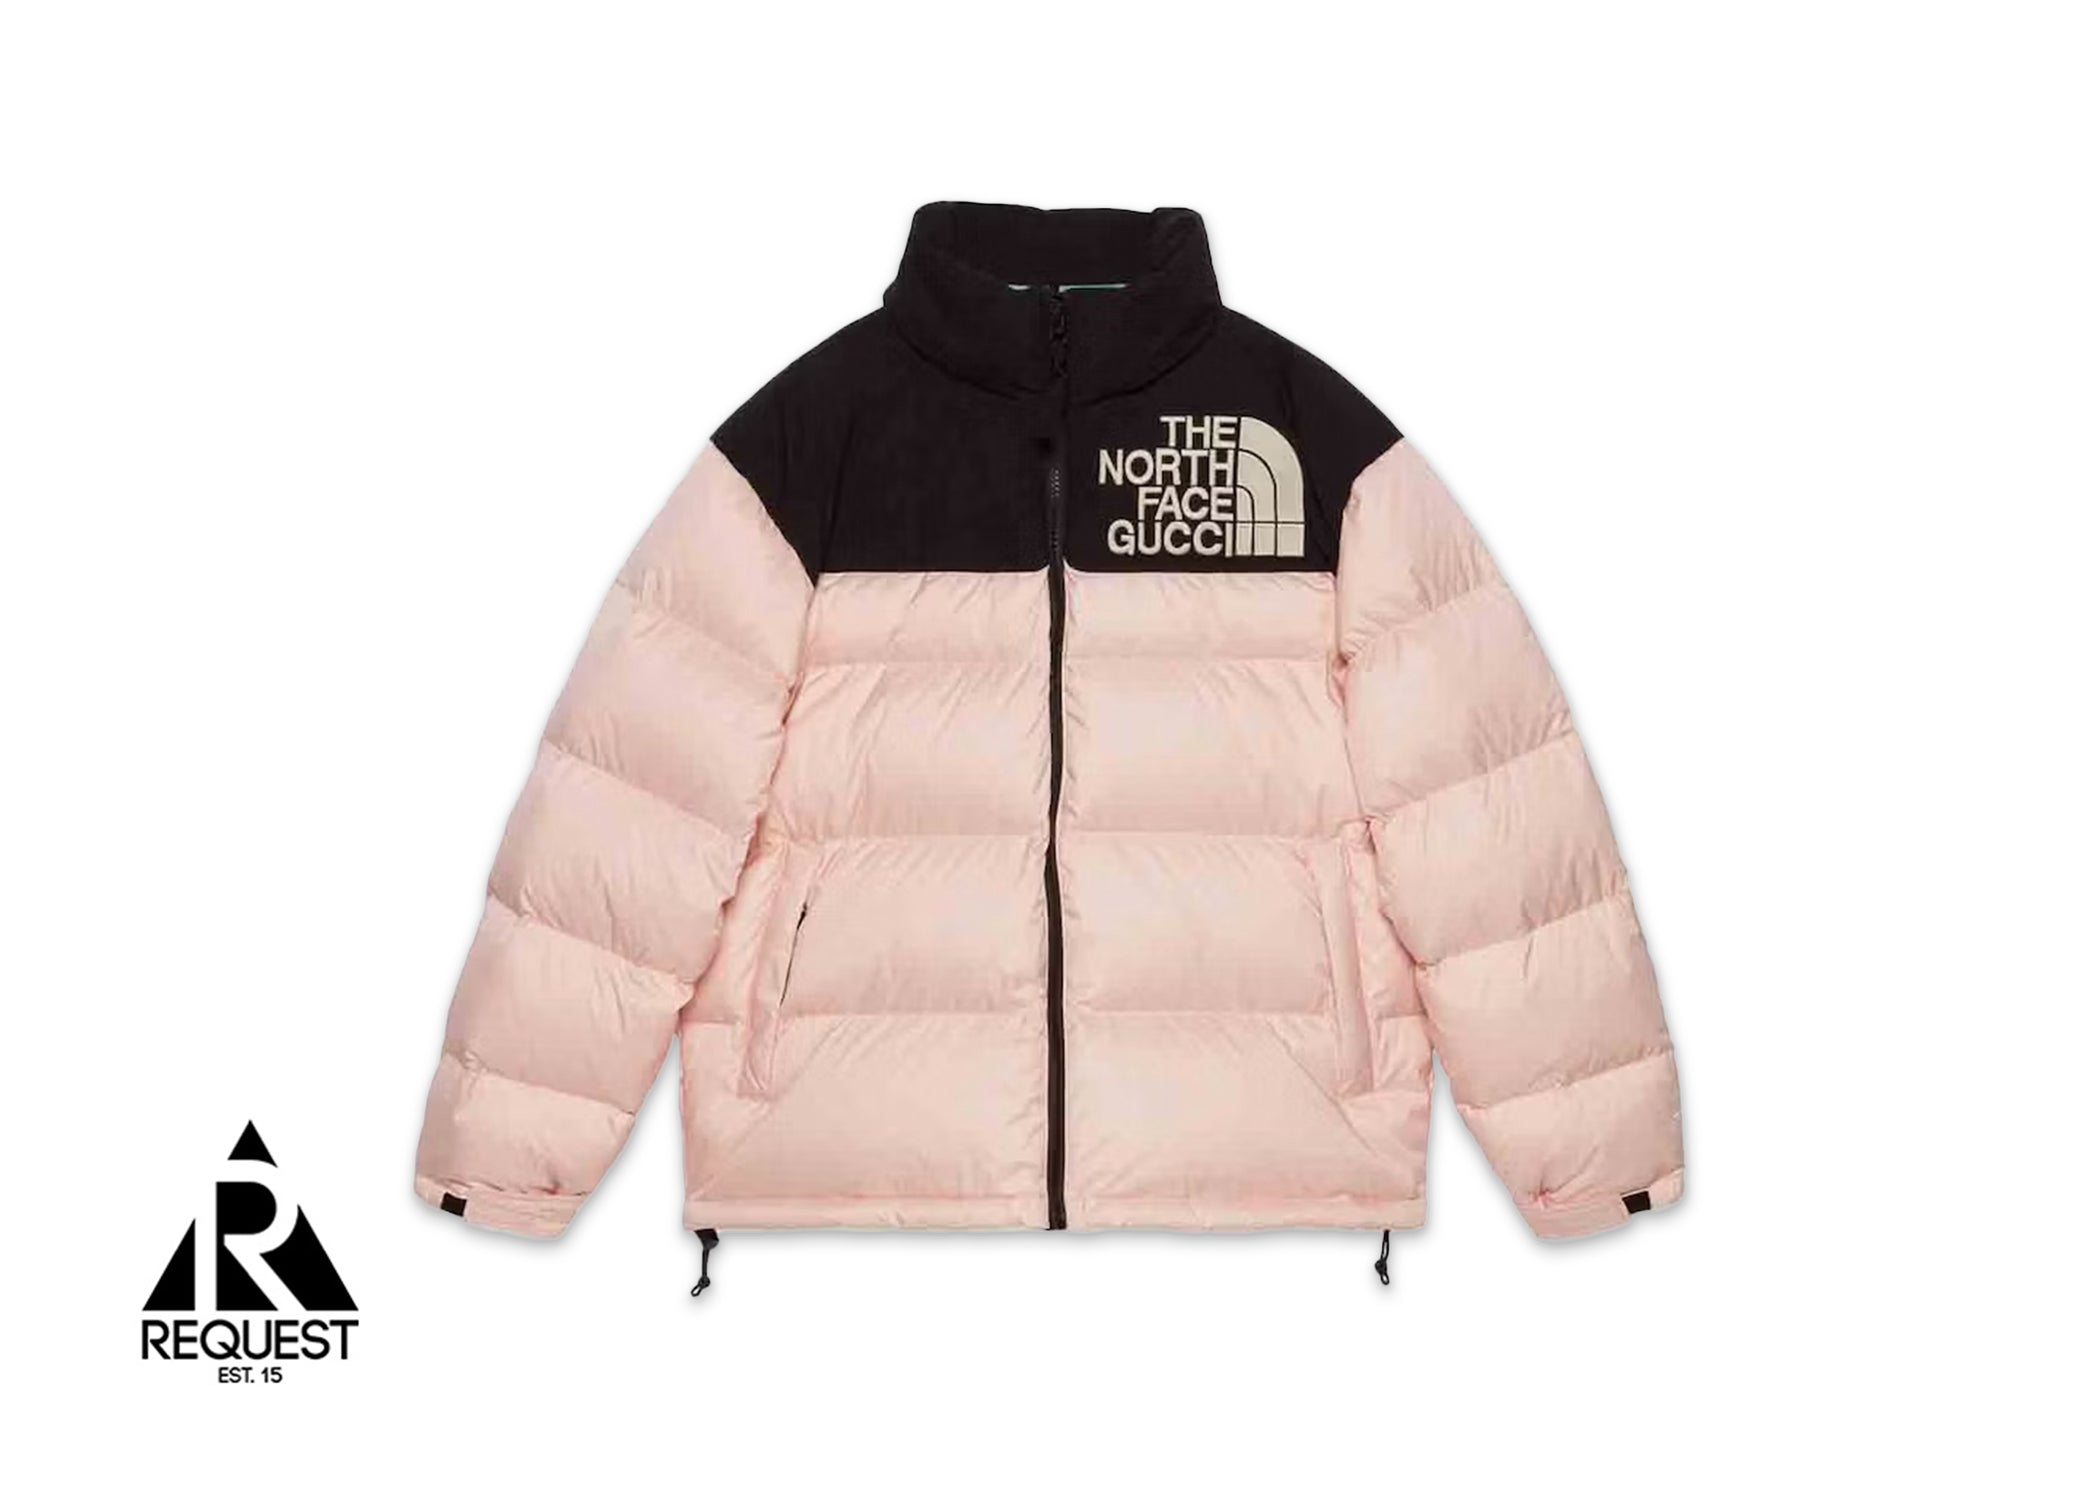 Gucci x The North Face Padded Jacket "Light Pink/Black"